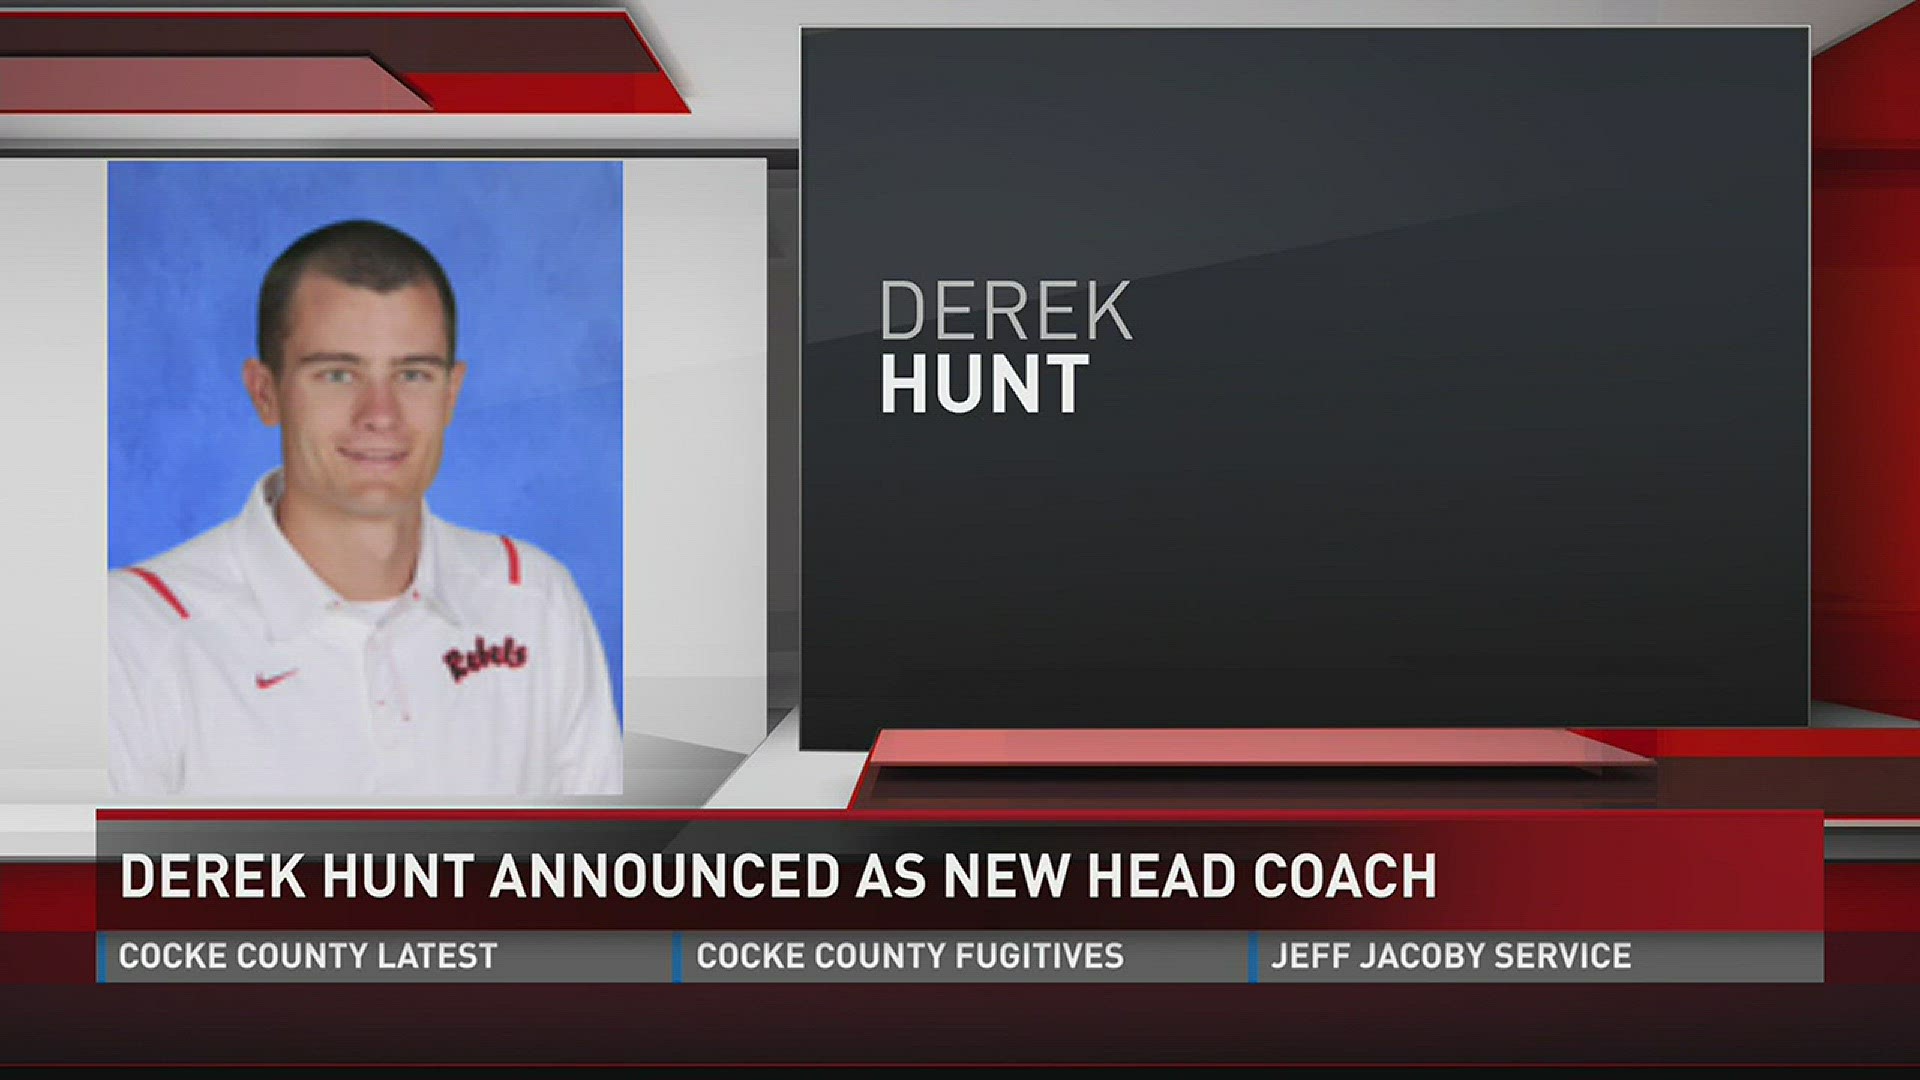 Maryville City Schools announced the appointment of Derek Hunt as the Maryville High School's head coach on Tuesday.